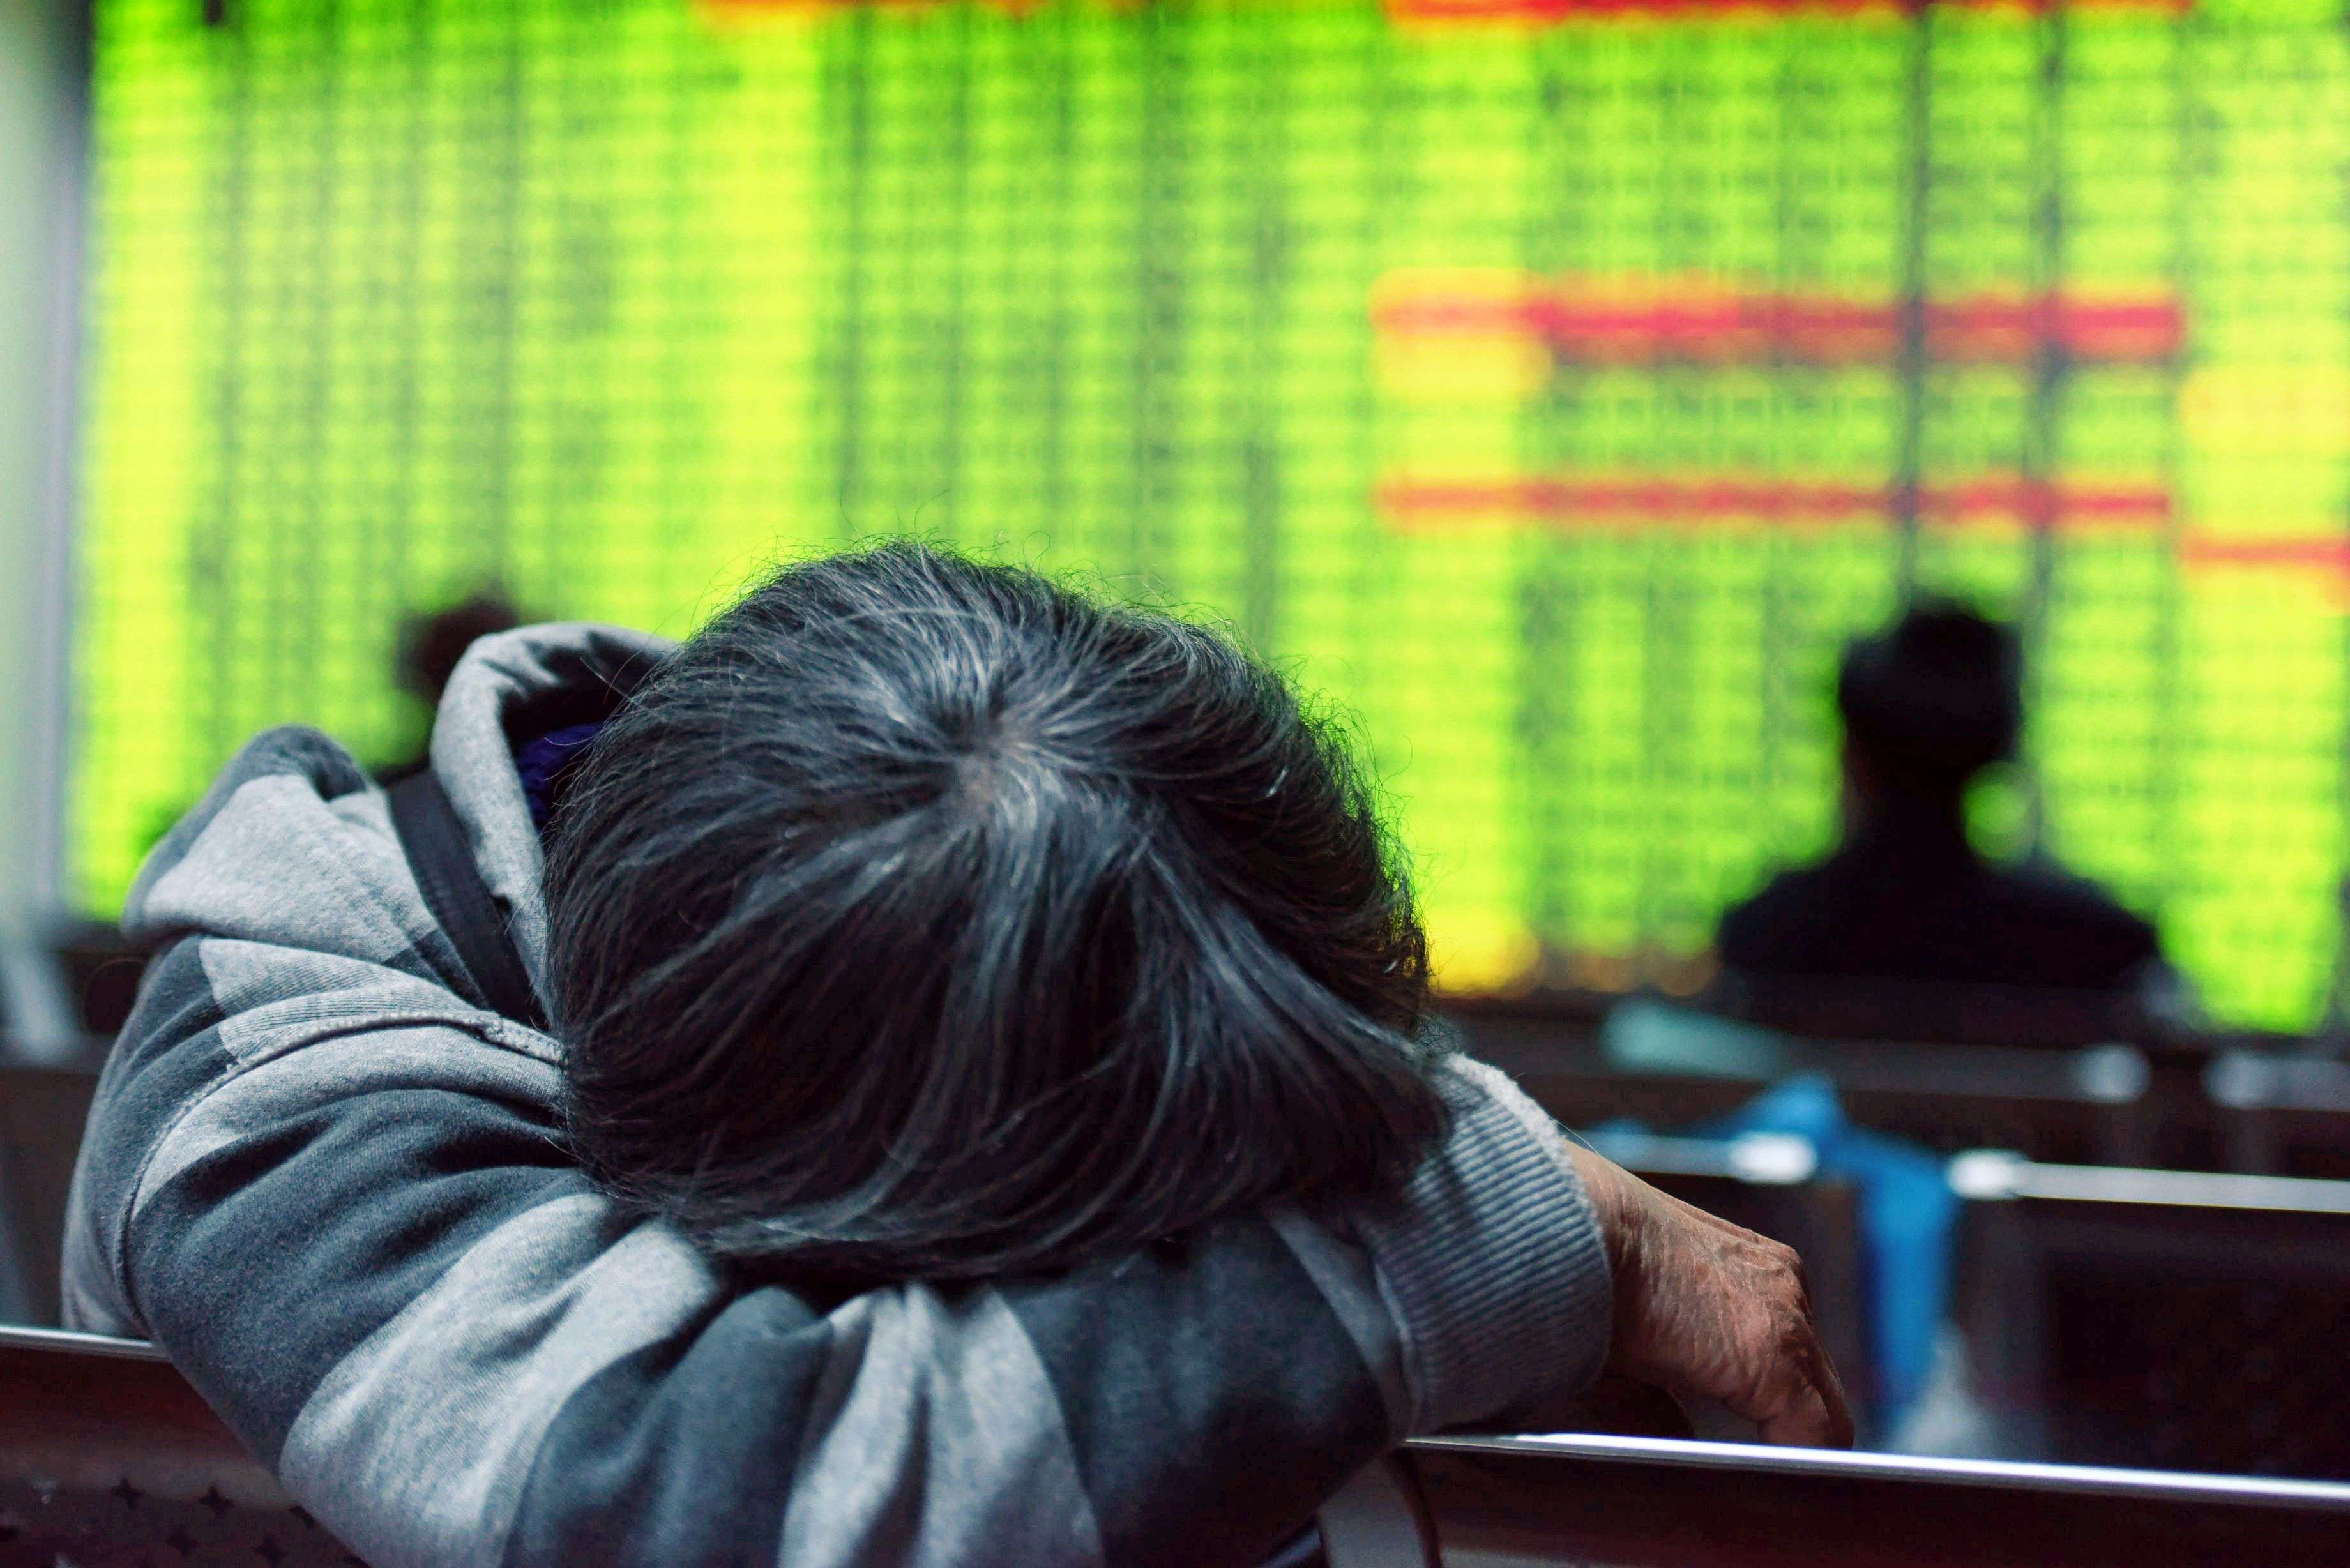 A weary investor after the Shanghai stock index tumbled 5 per cent on January 11. Opposite to global norms, green colour in China’s equity market indicates declines. Photo: AFP